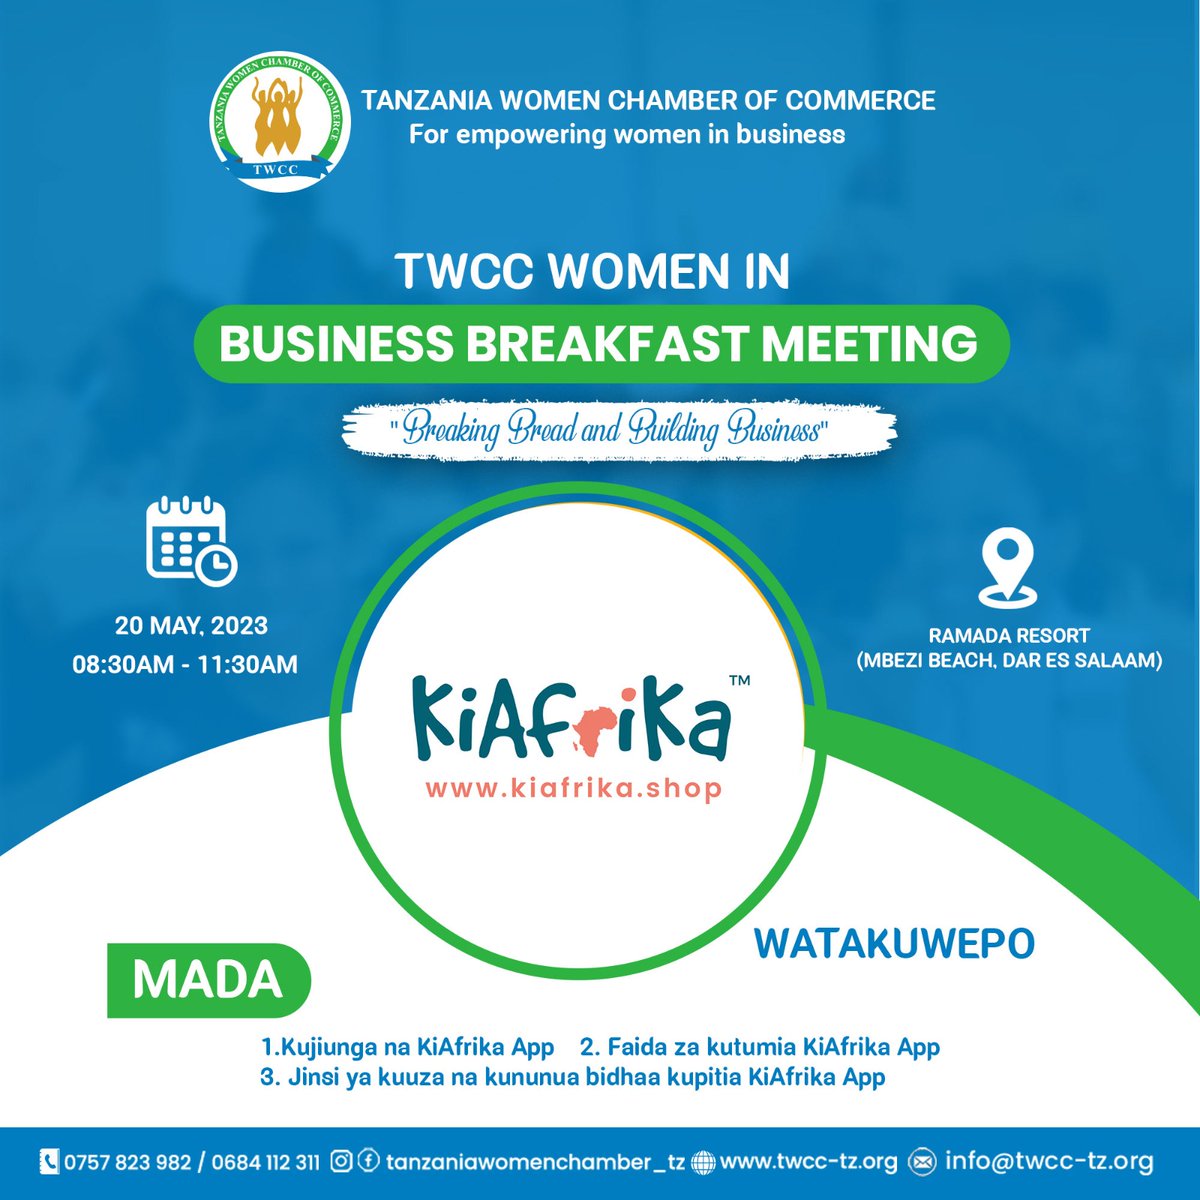 Excited News!@KIAFRIKA_ will attend the Women Networking Breakfast! They are ready to show how online markets are empowering African designers by providing a platform to sell their incredible creations. #AfricanDesigners #OnlineMarketplace #WomenNetworking